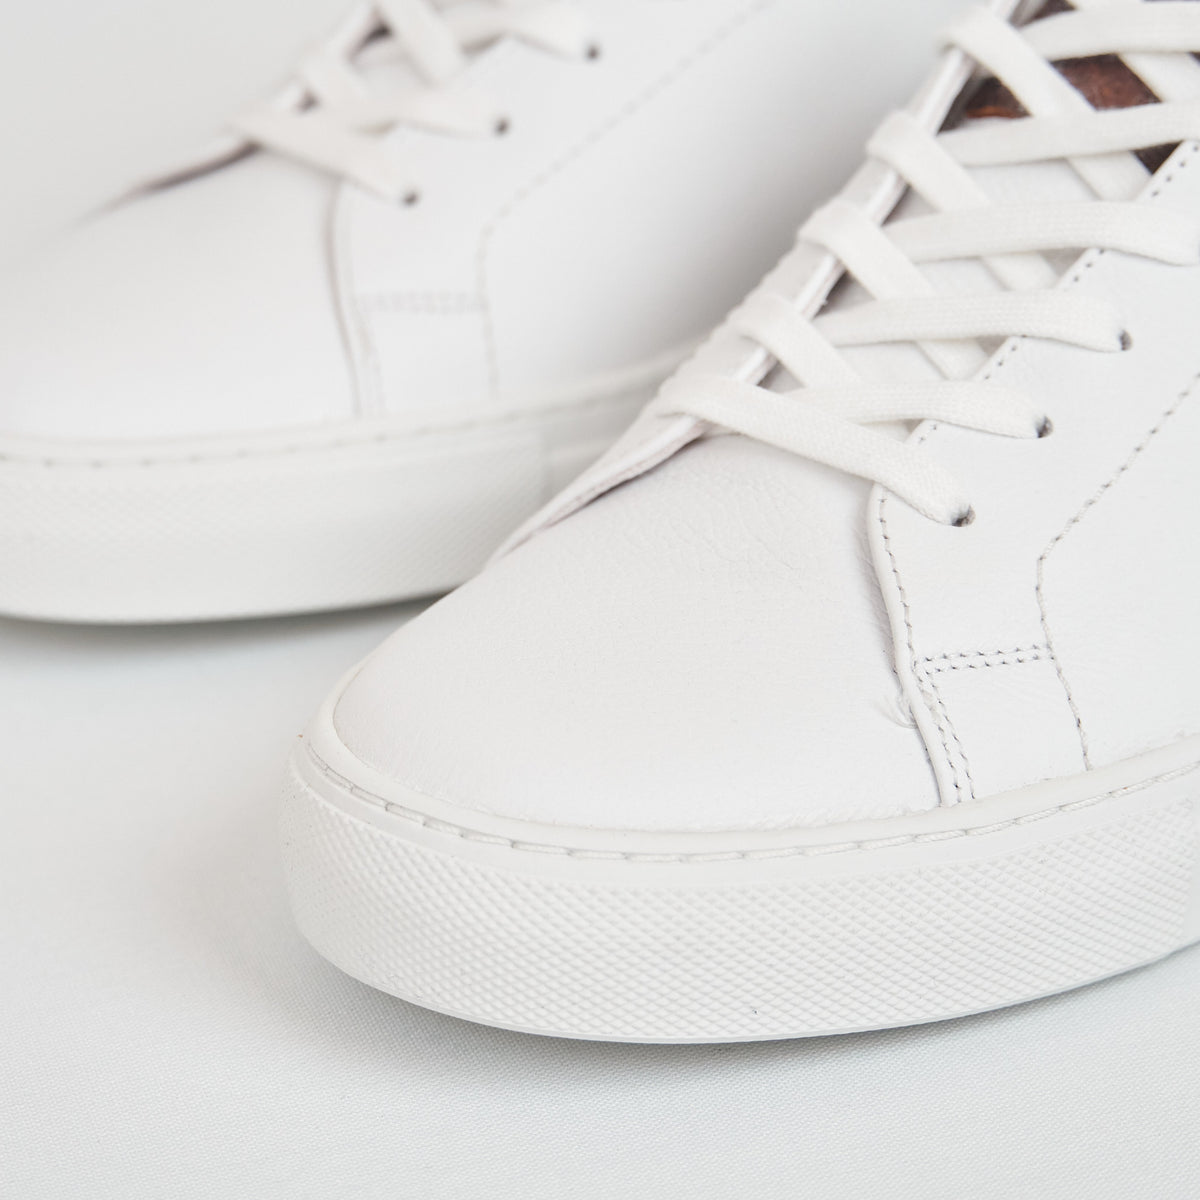 Ludwig Reiter Leather Sneakers